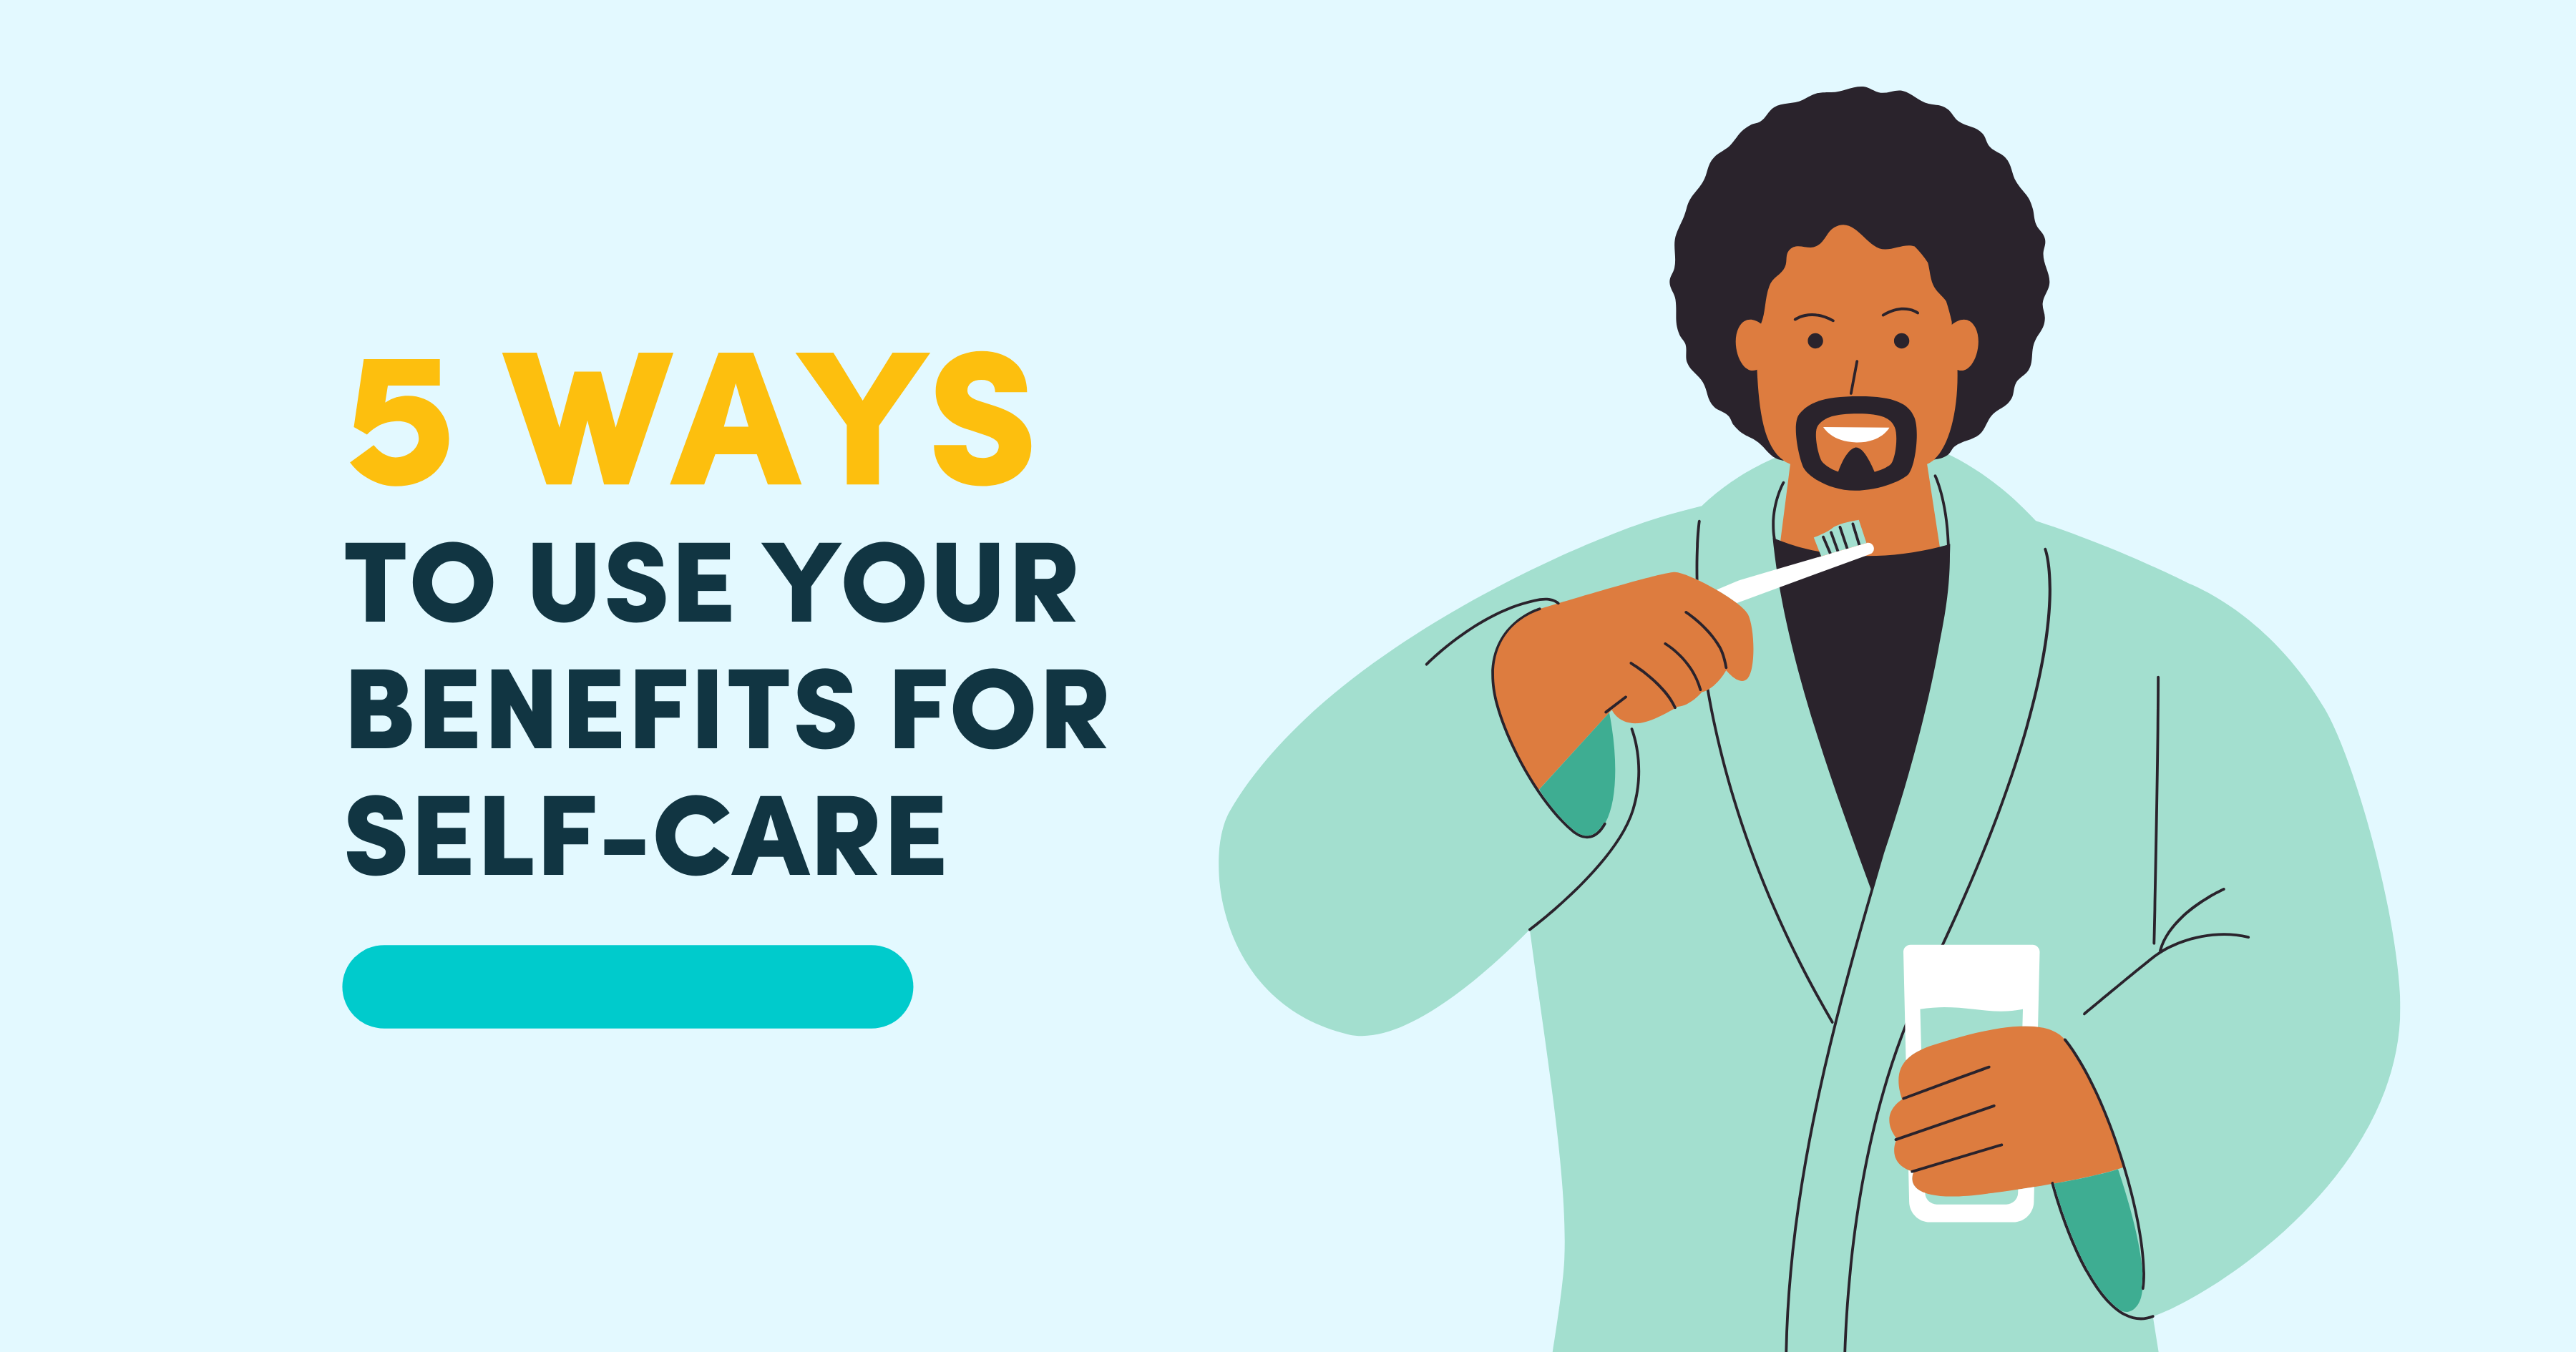 5 Ways to Use Your Benefits for Self-Care